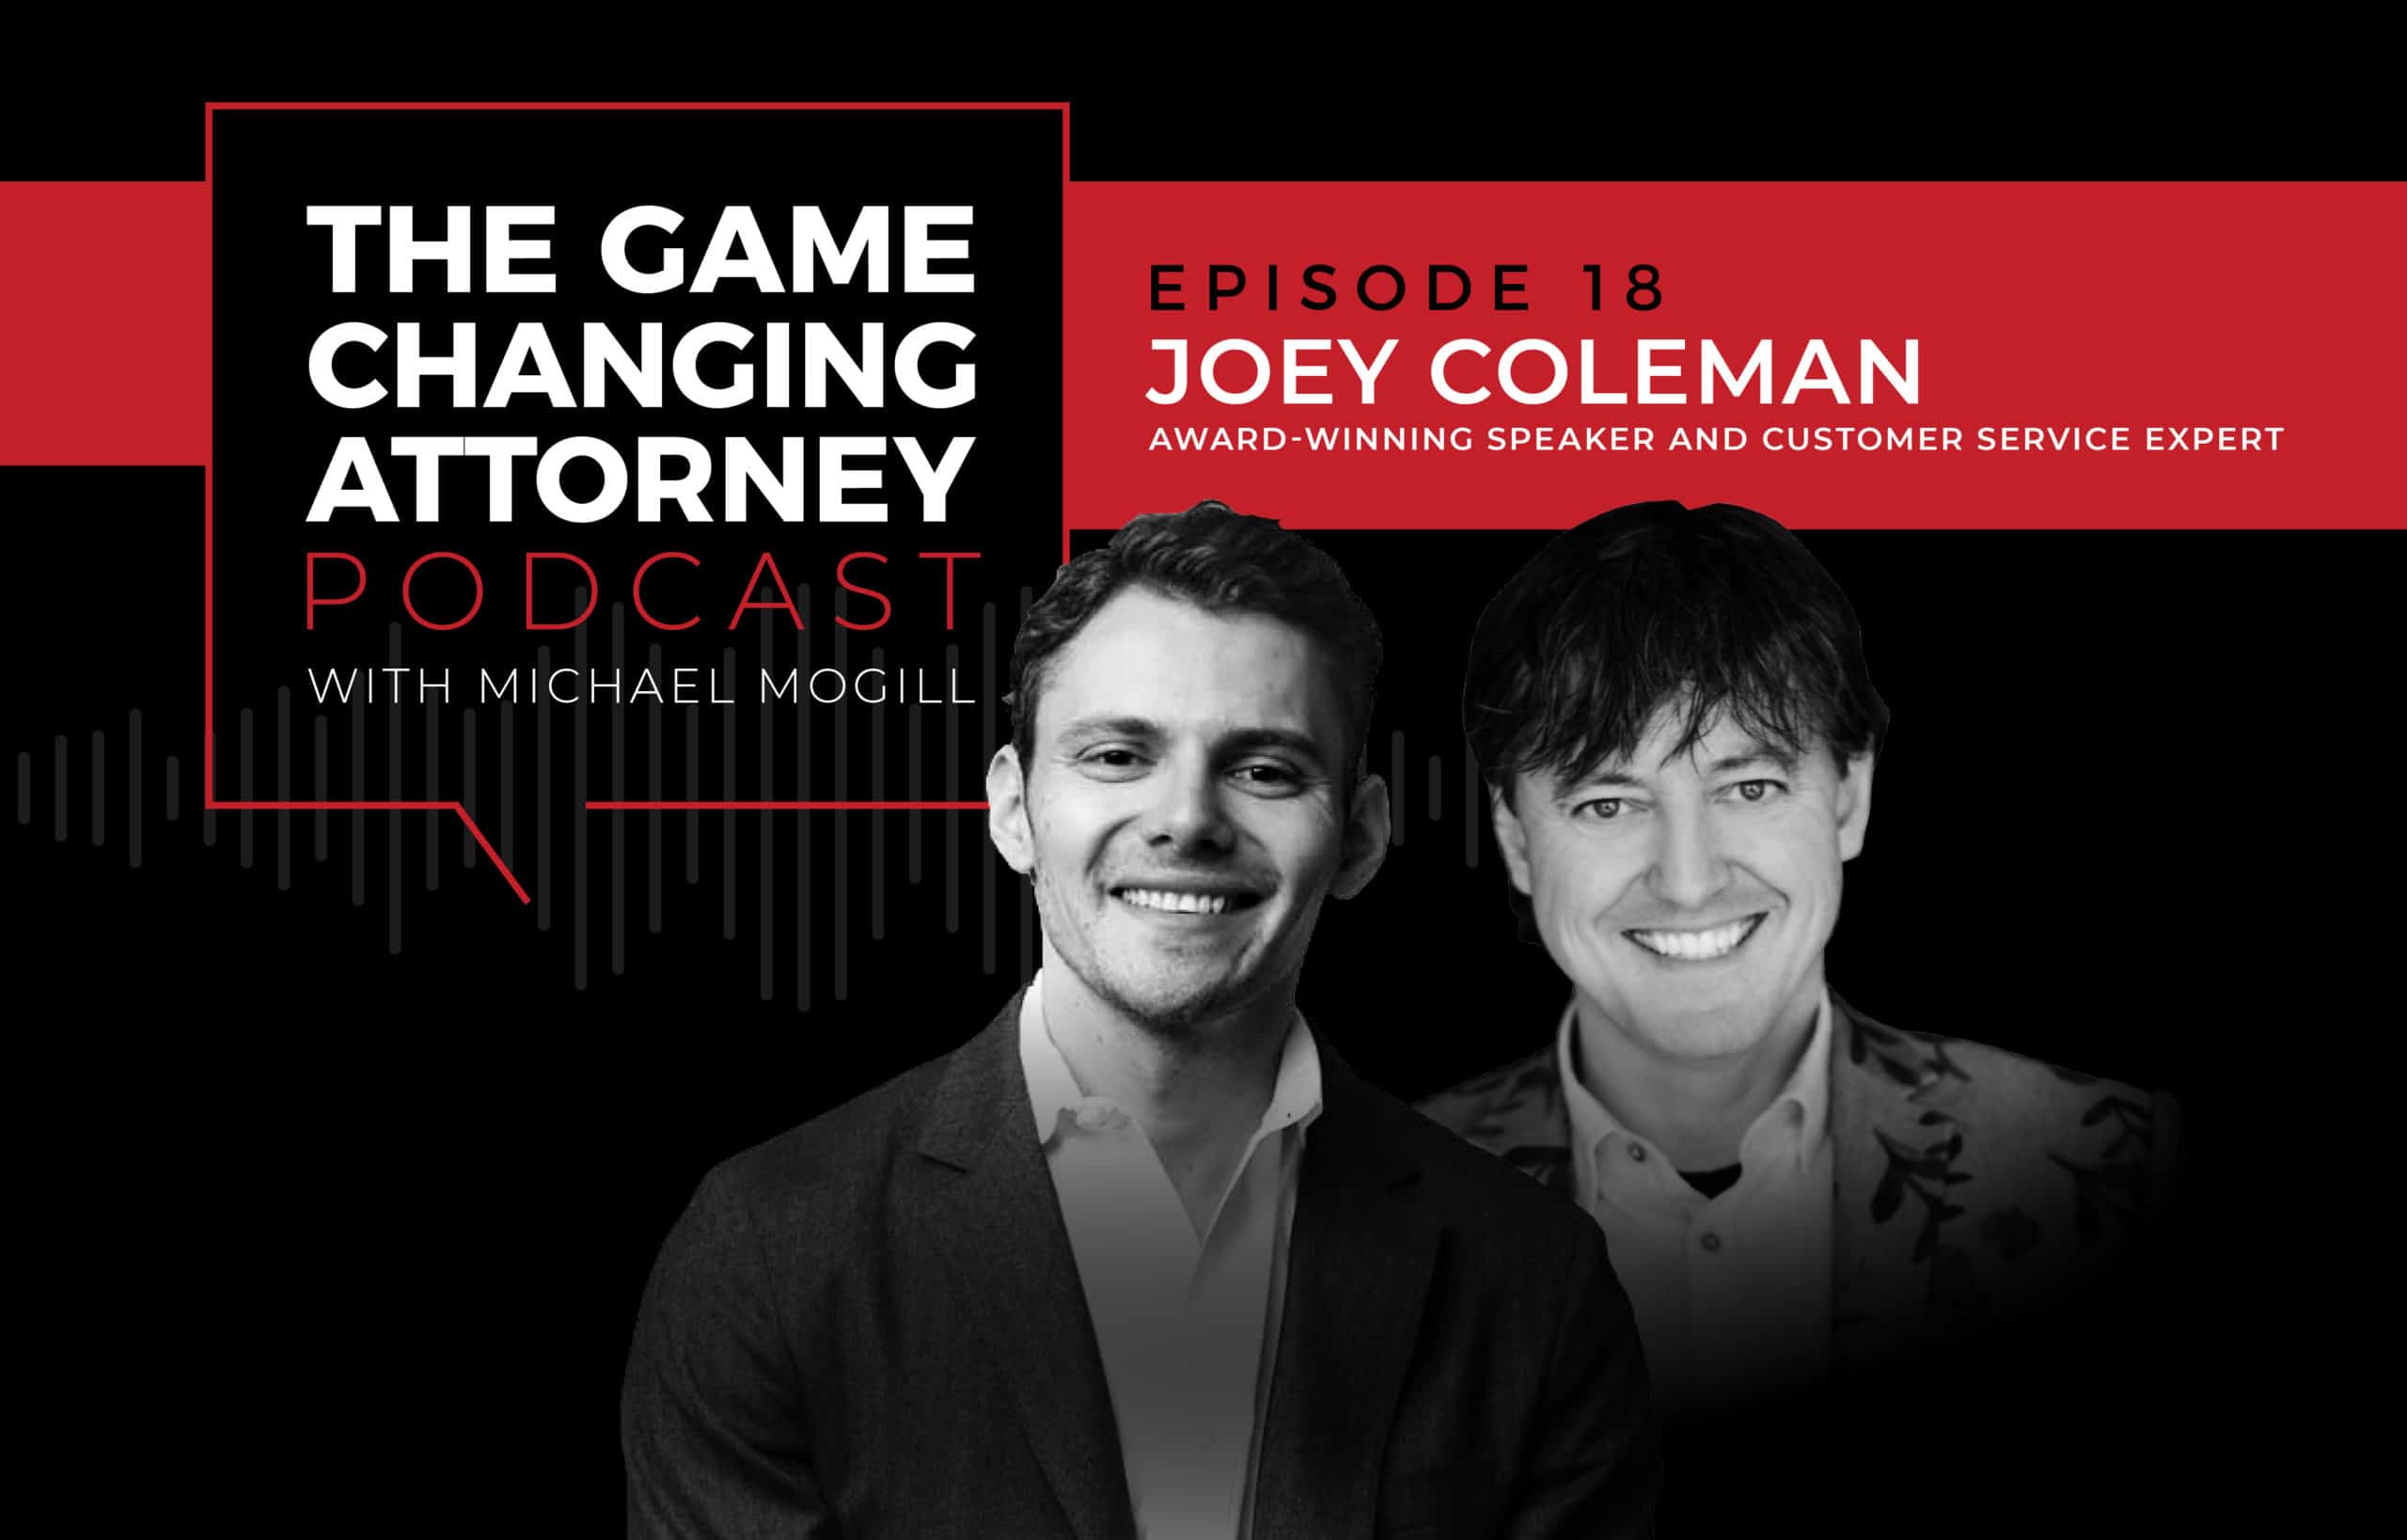 Joey Coleman - The Game Changing Attorney Podcast - Mobile